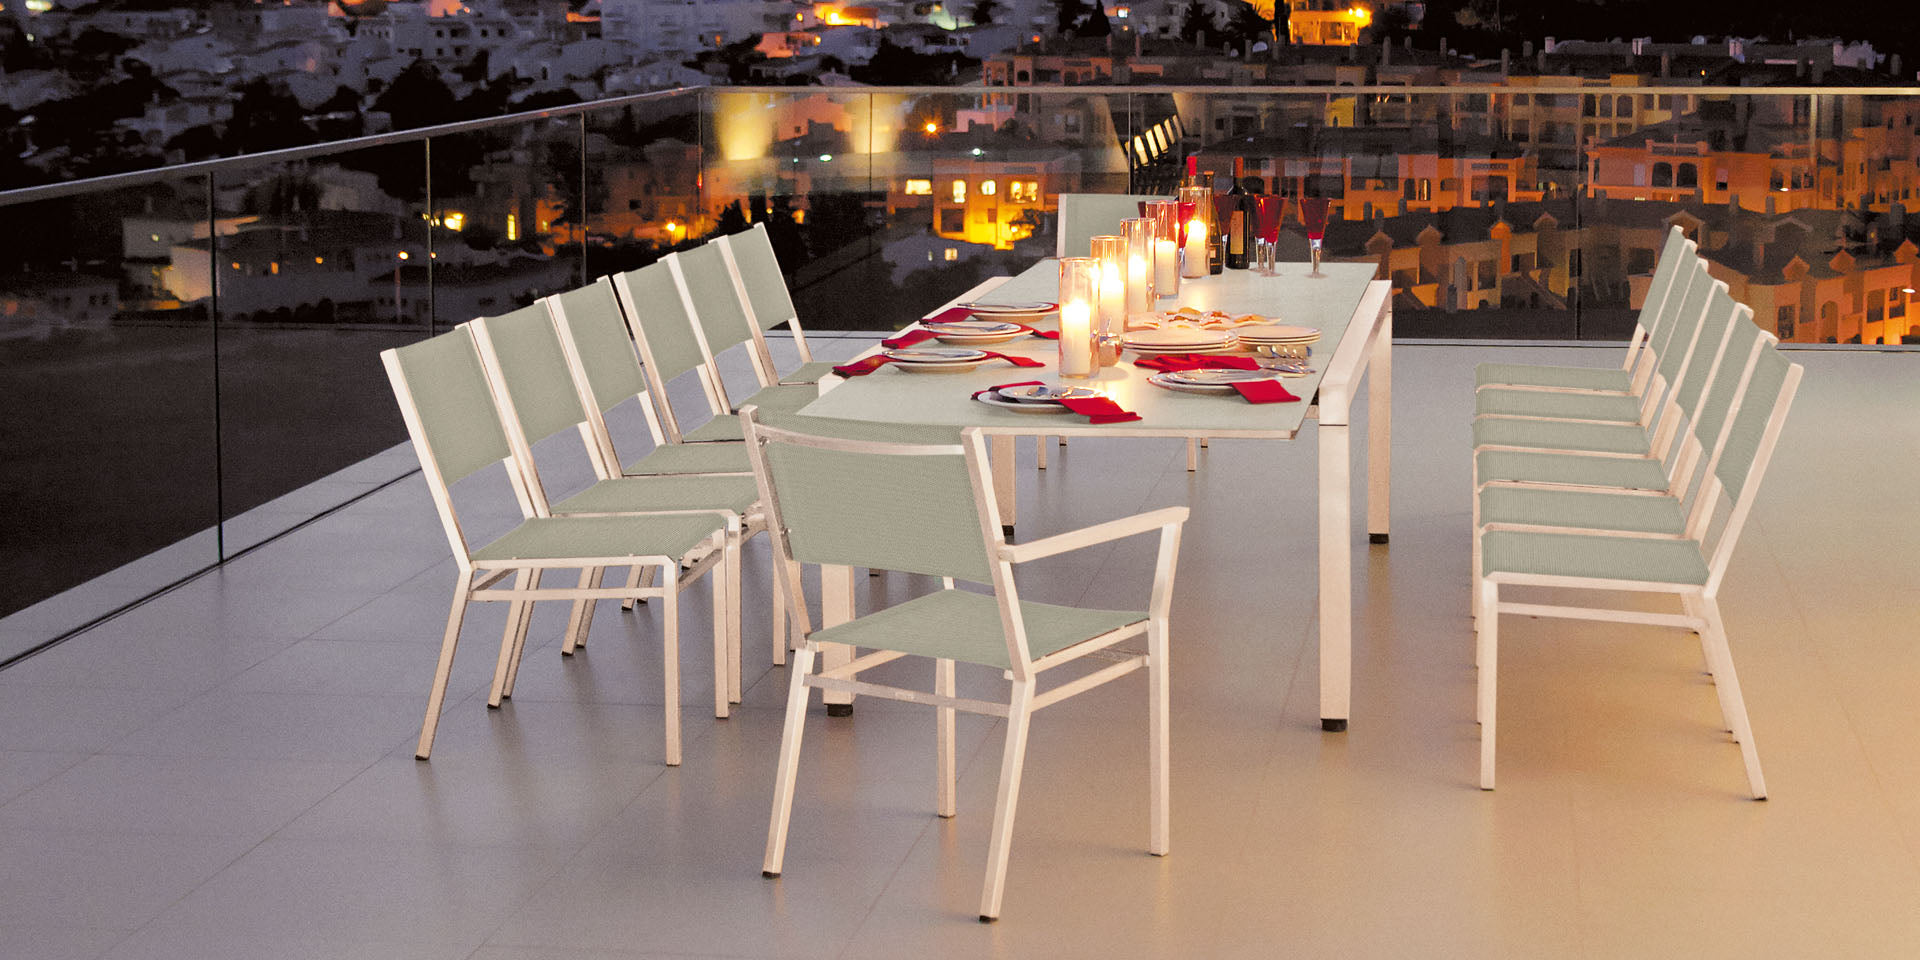 Equinox High Dining High Dining Chair - Powder coated